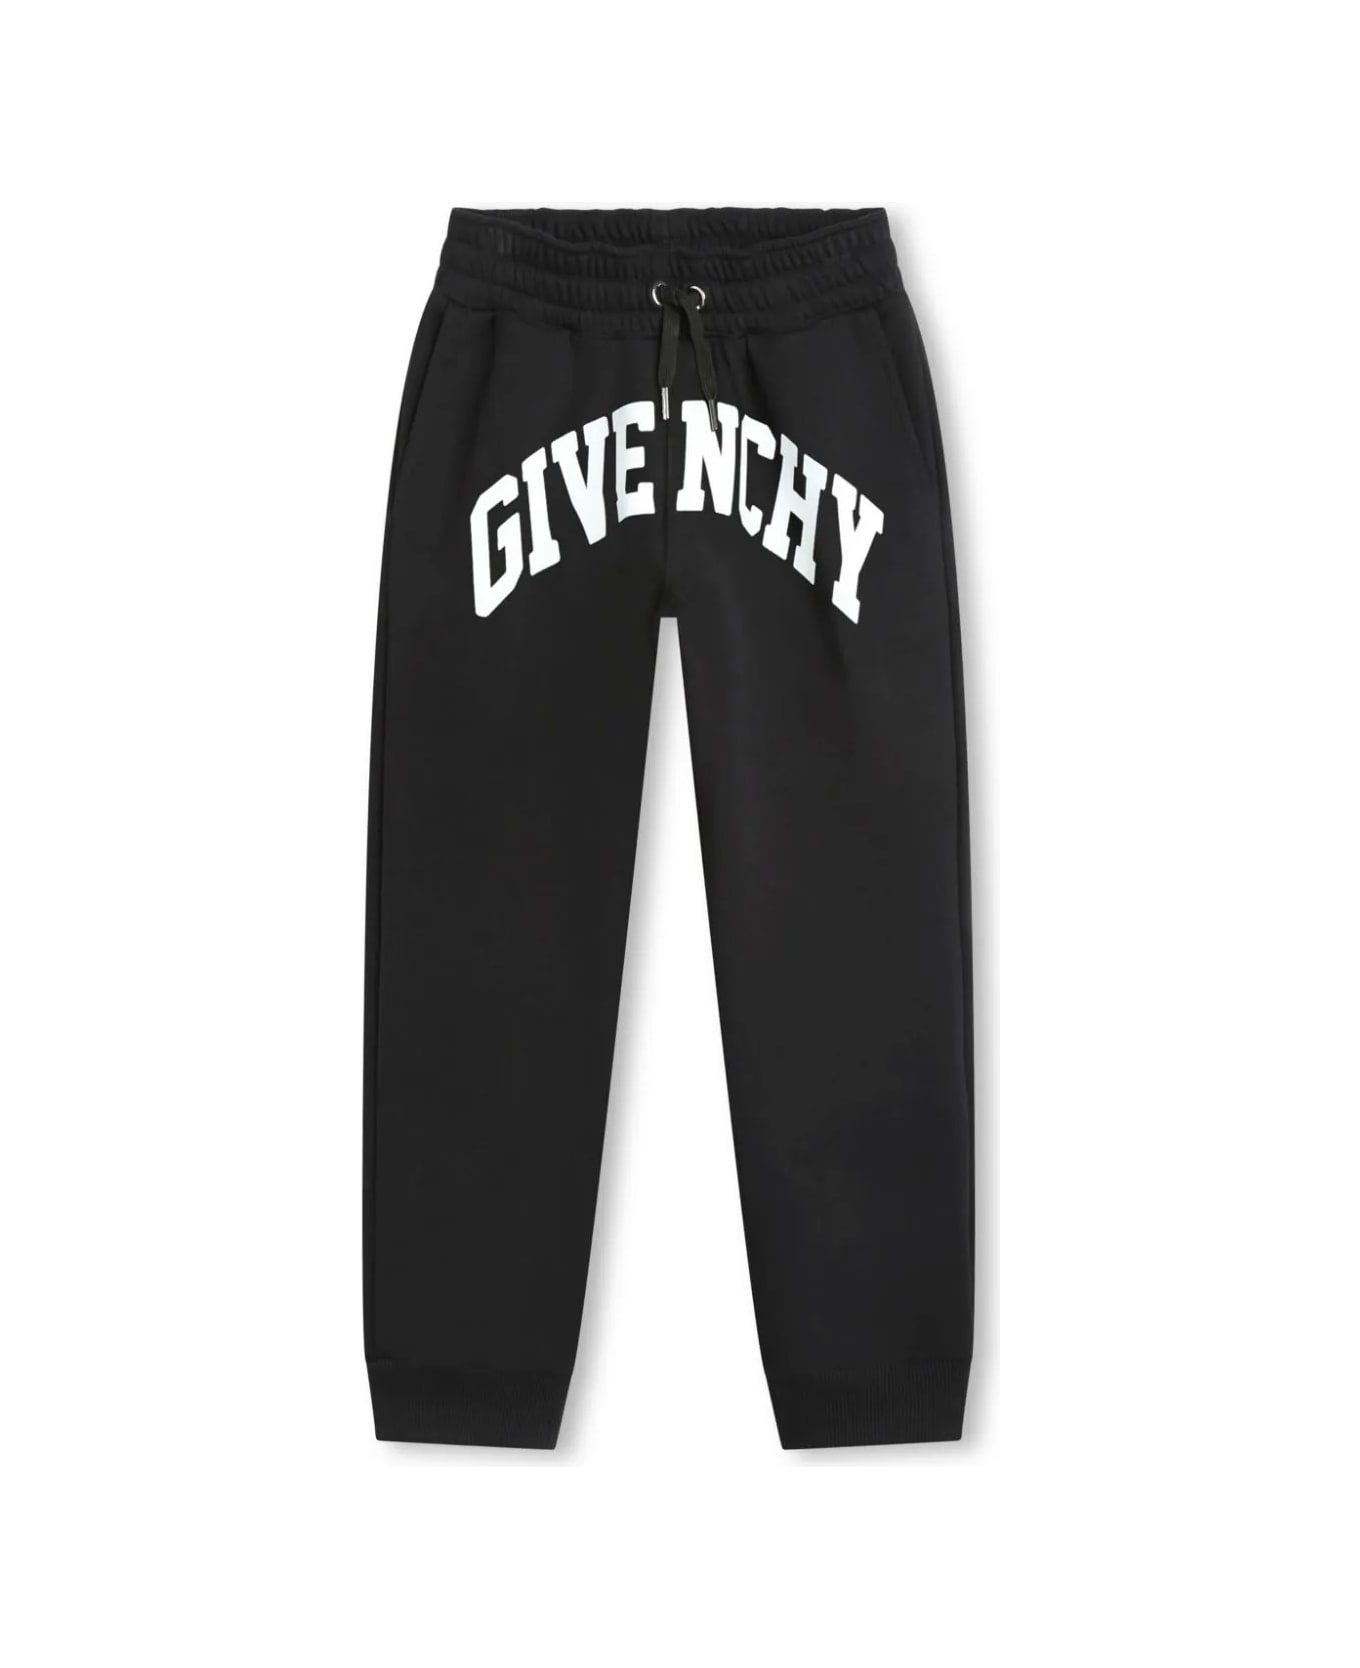 Givenchy Black Joggers With Arched Logo - B Nero ボトムス